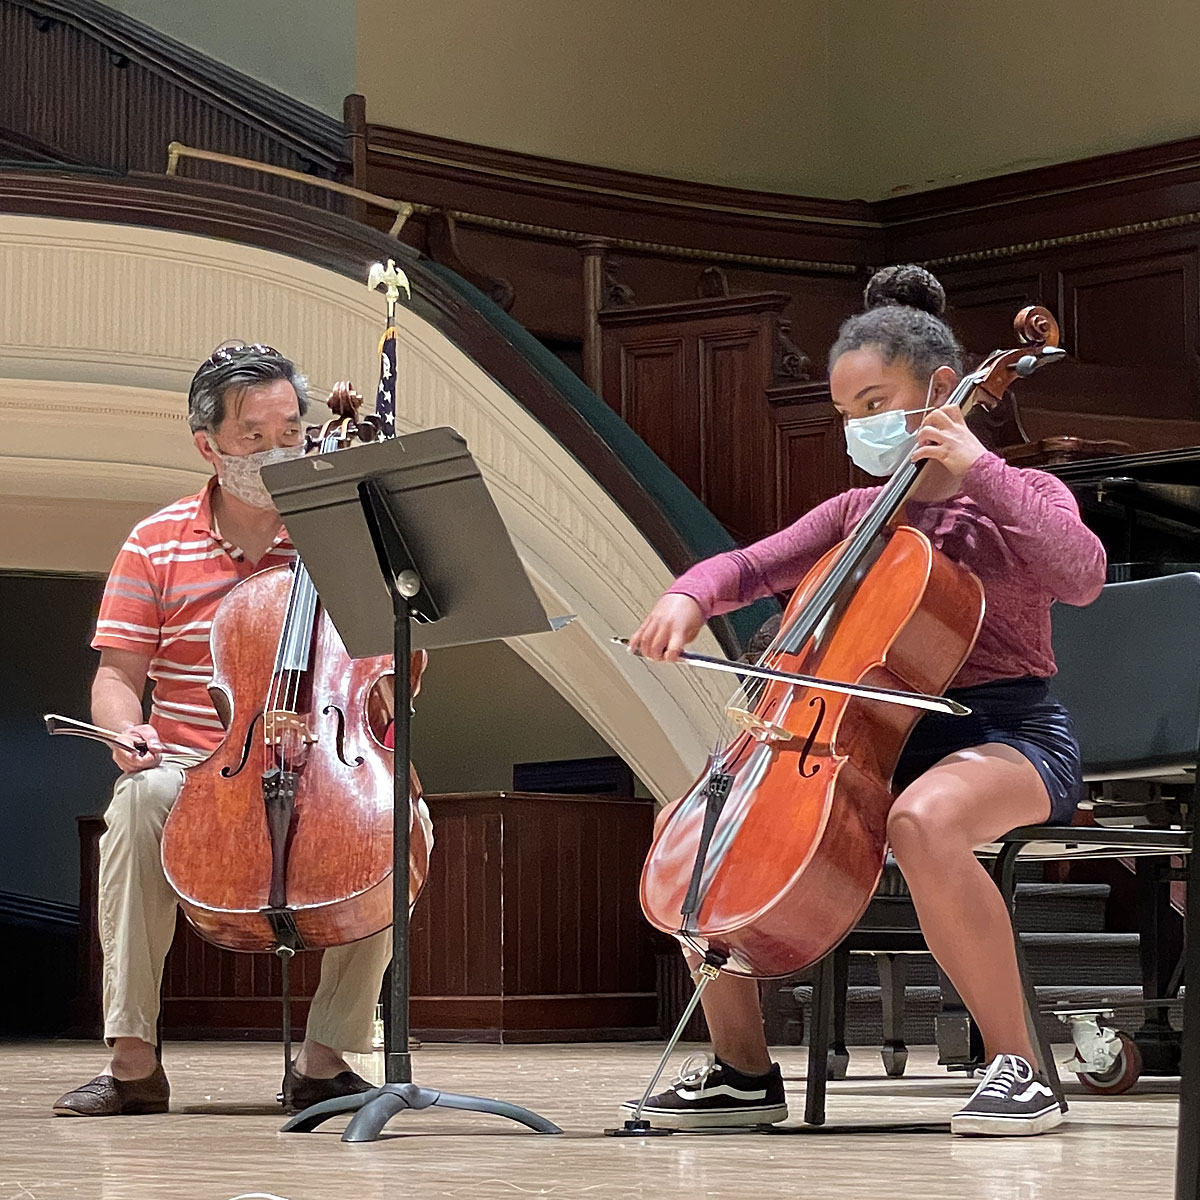 CelloVision summer camp provides special opportunities for students